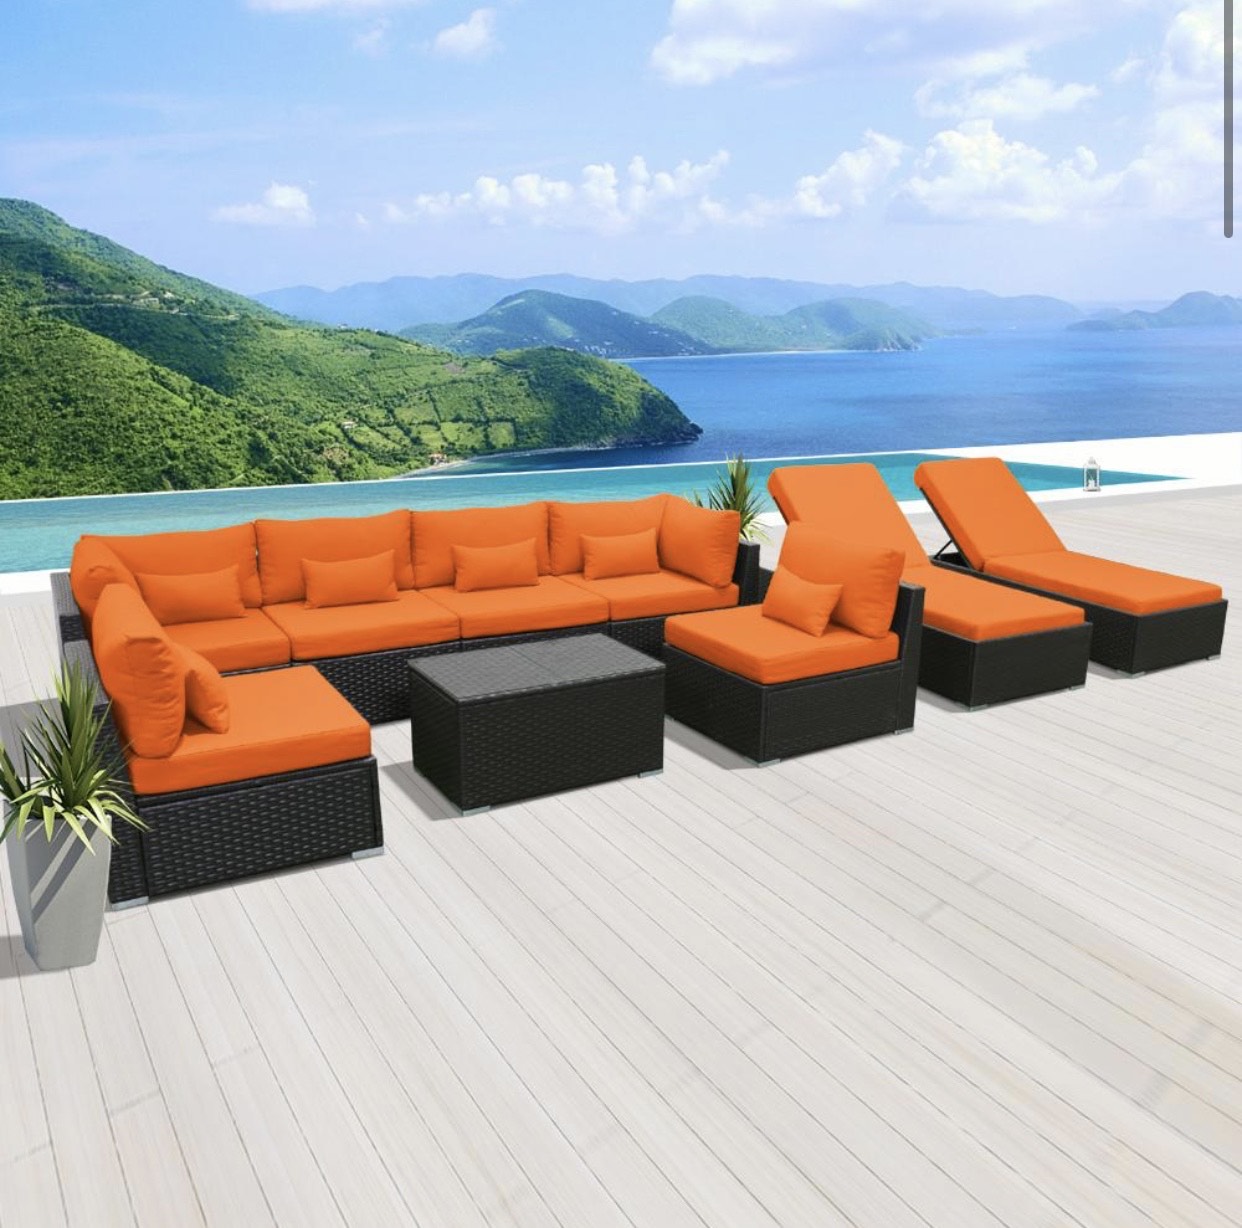 Orange 7G2A Replacement Cushion Cover Outdoor Patio Wicker Sofa Furniture Set (Without Foam Insis)